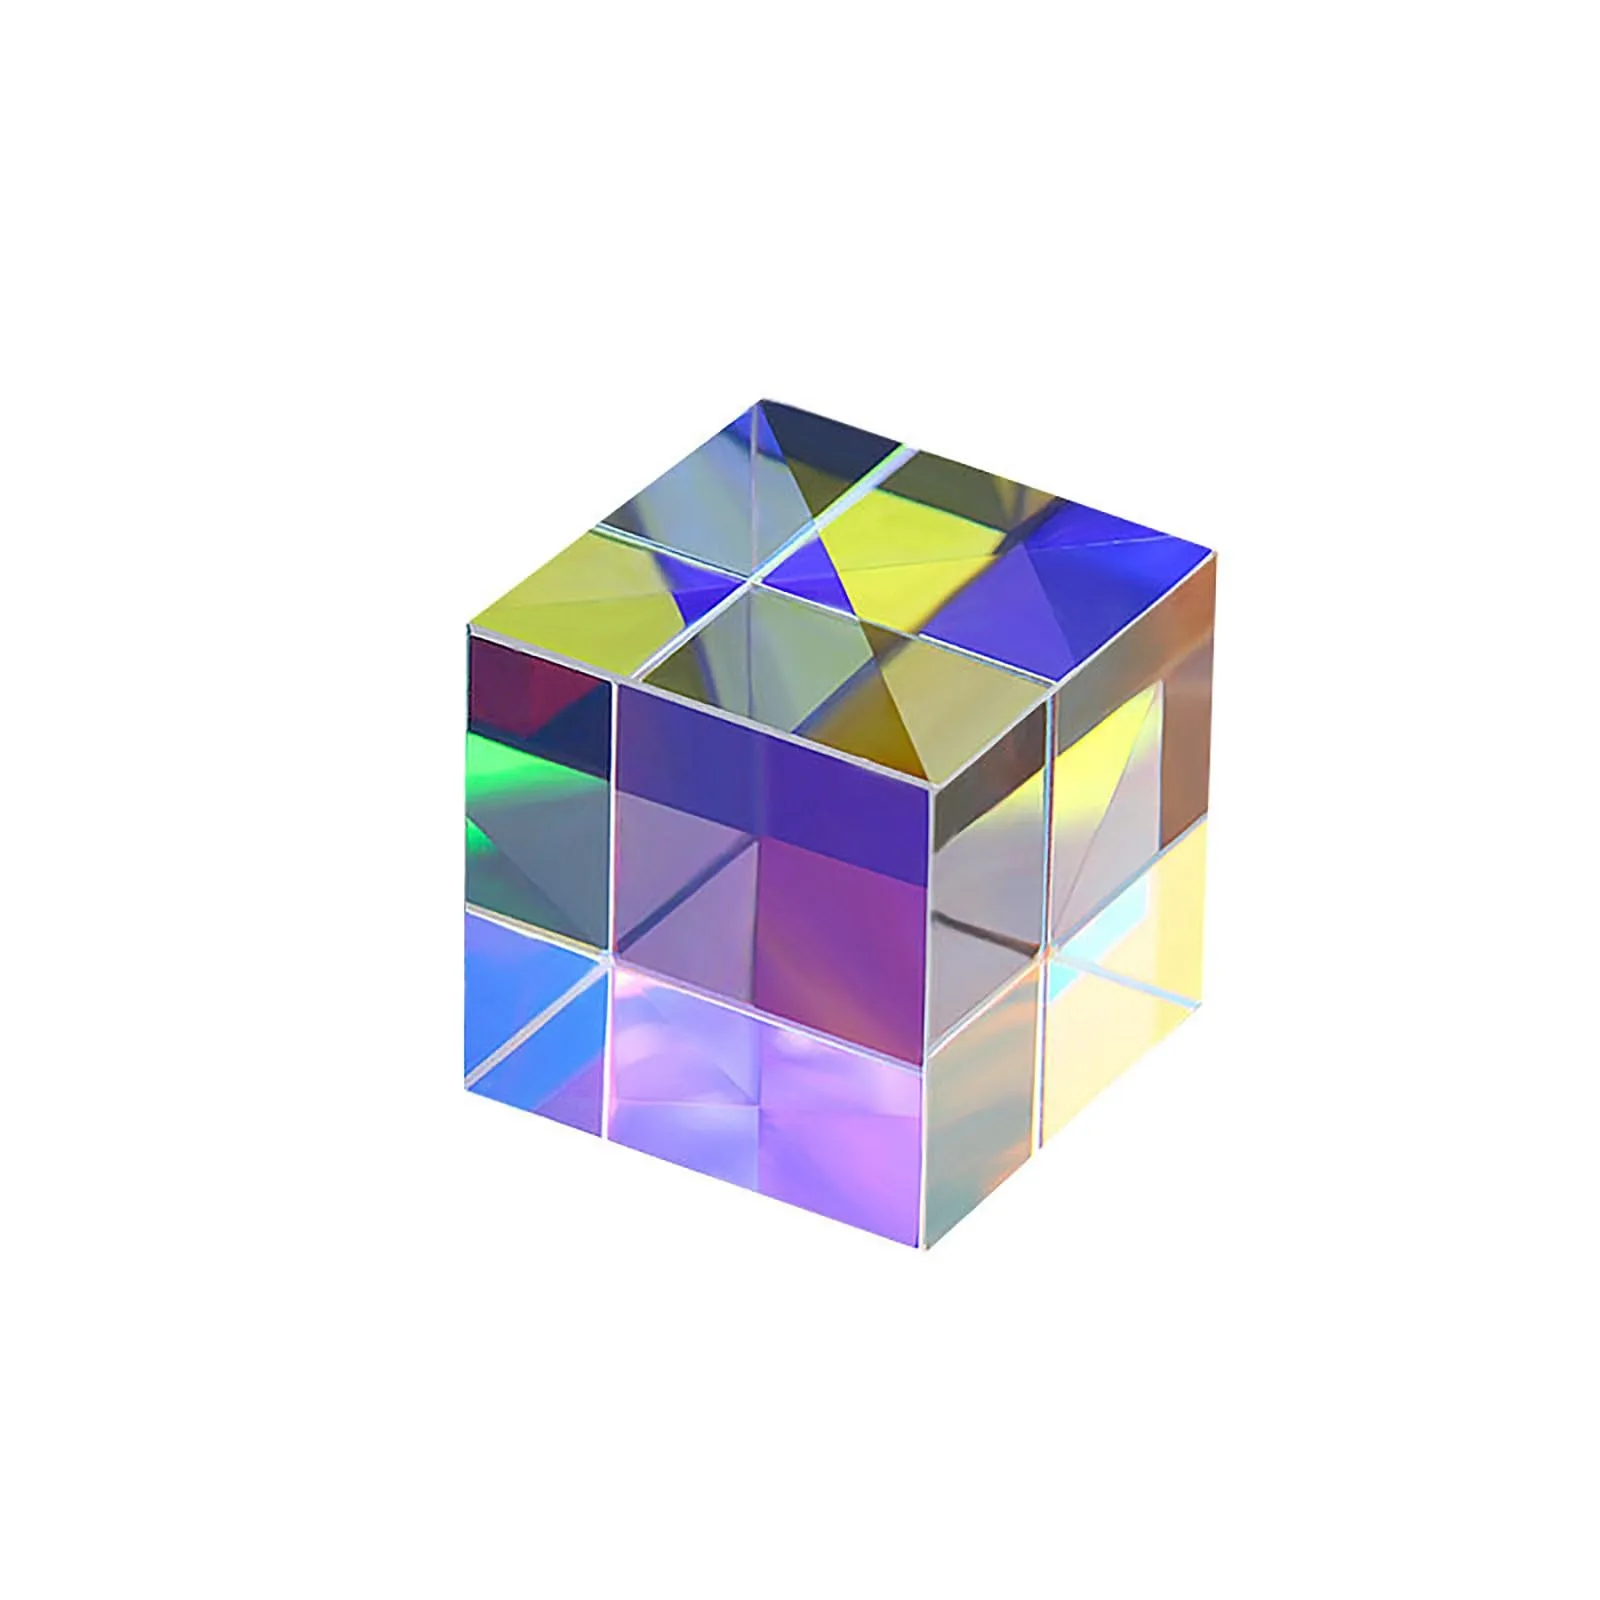 Optical Glass X-cube Dichroic Cube Prism RGB Combiner Splitter Gift Soft 2020 UK 